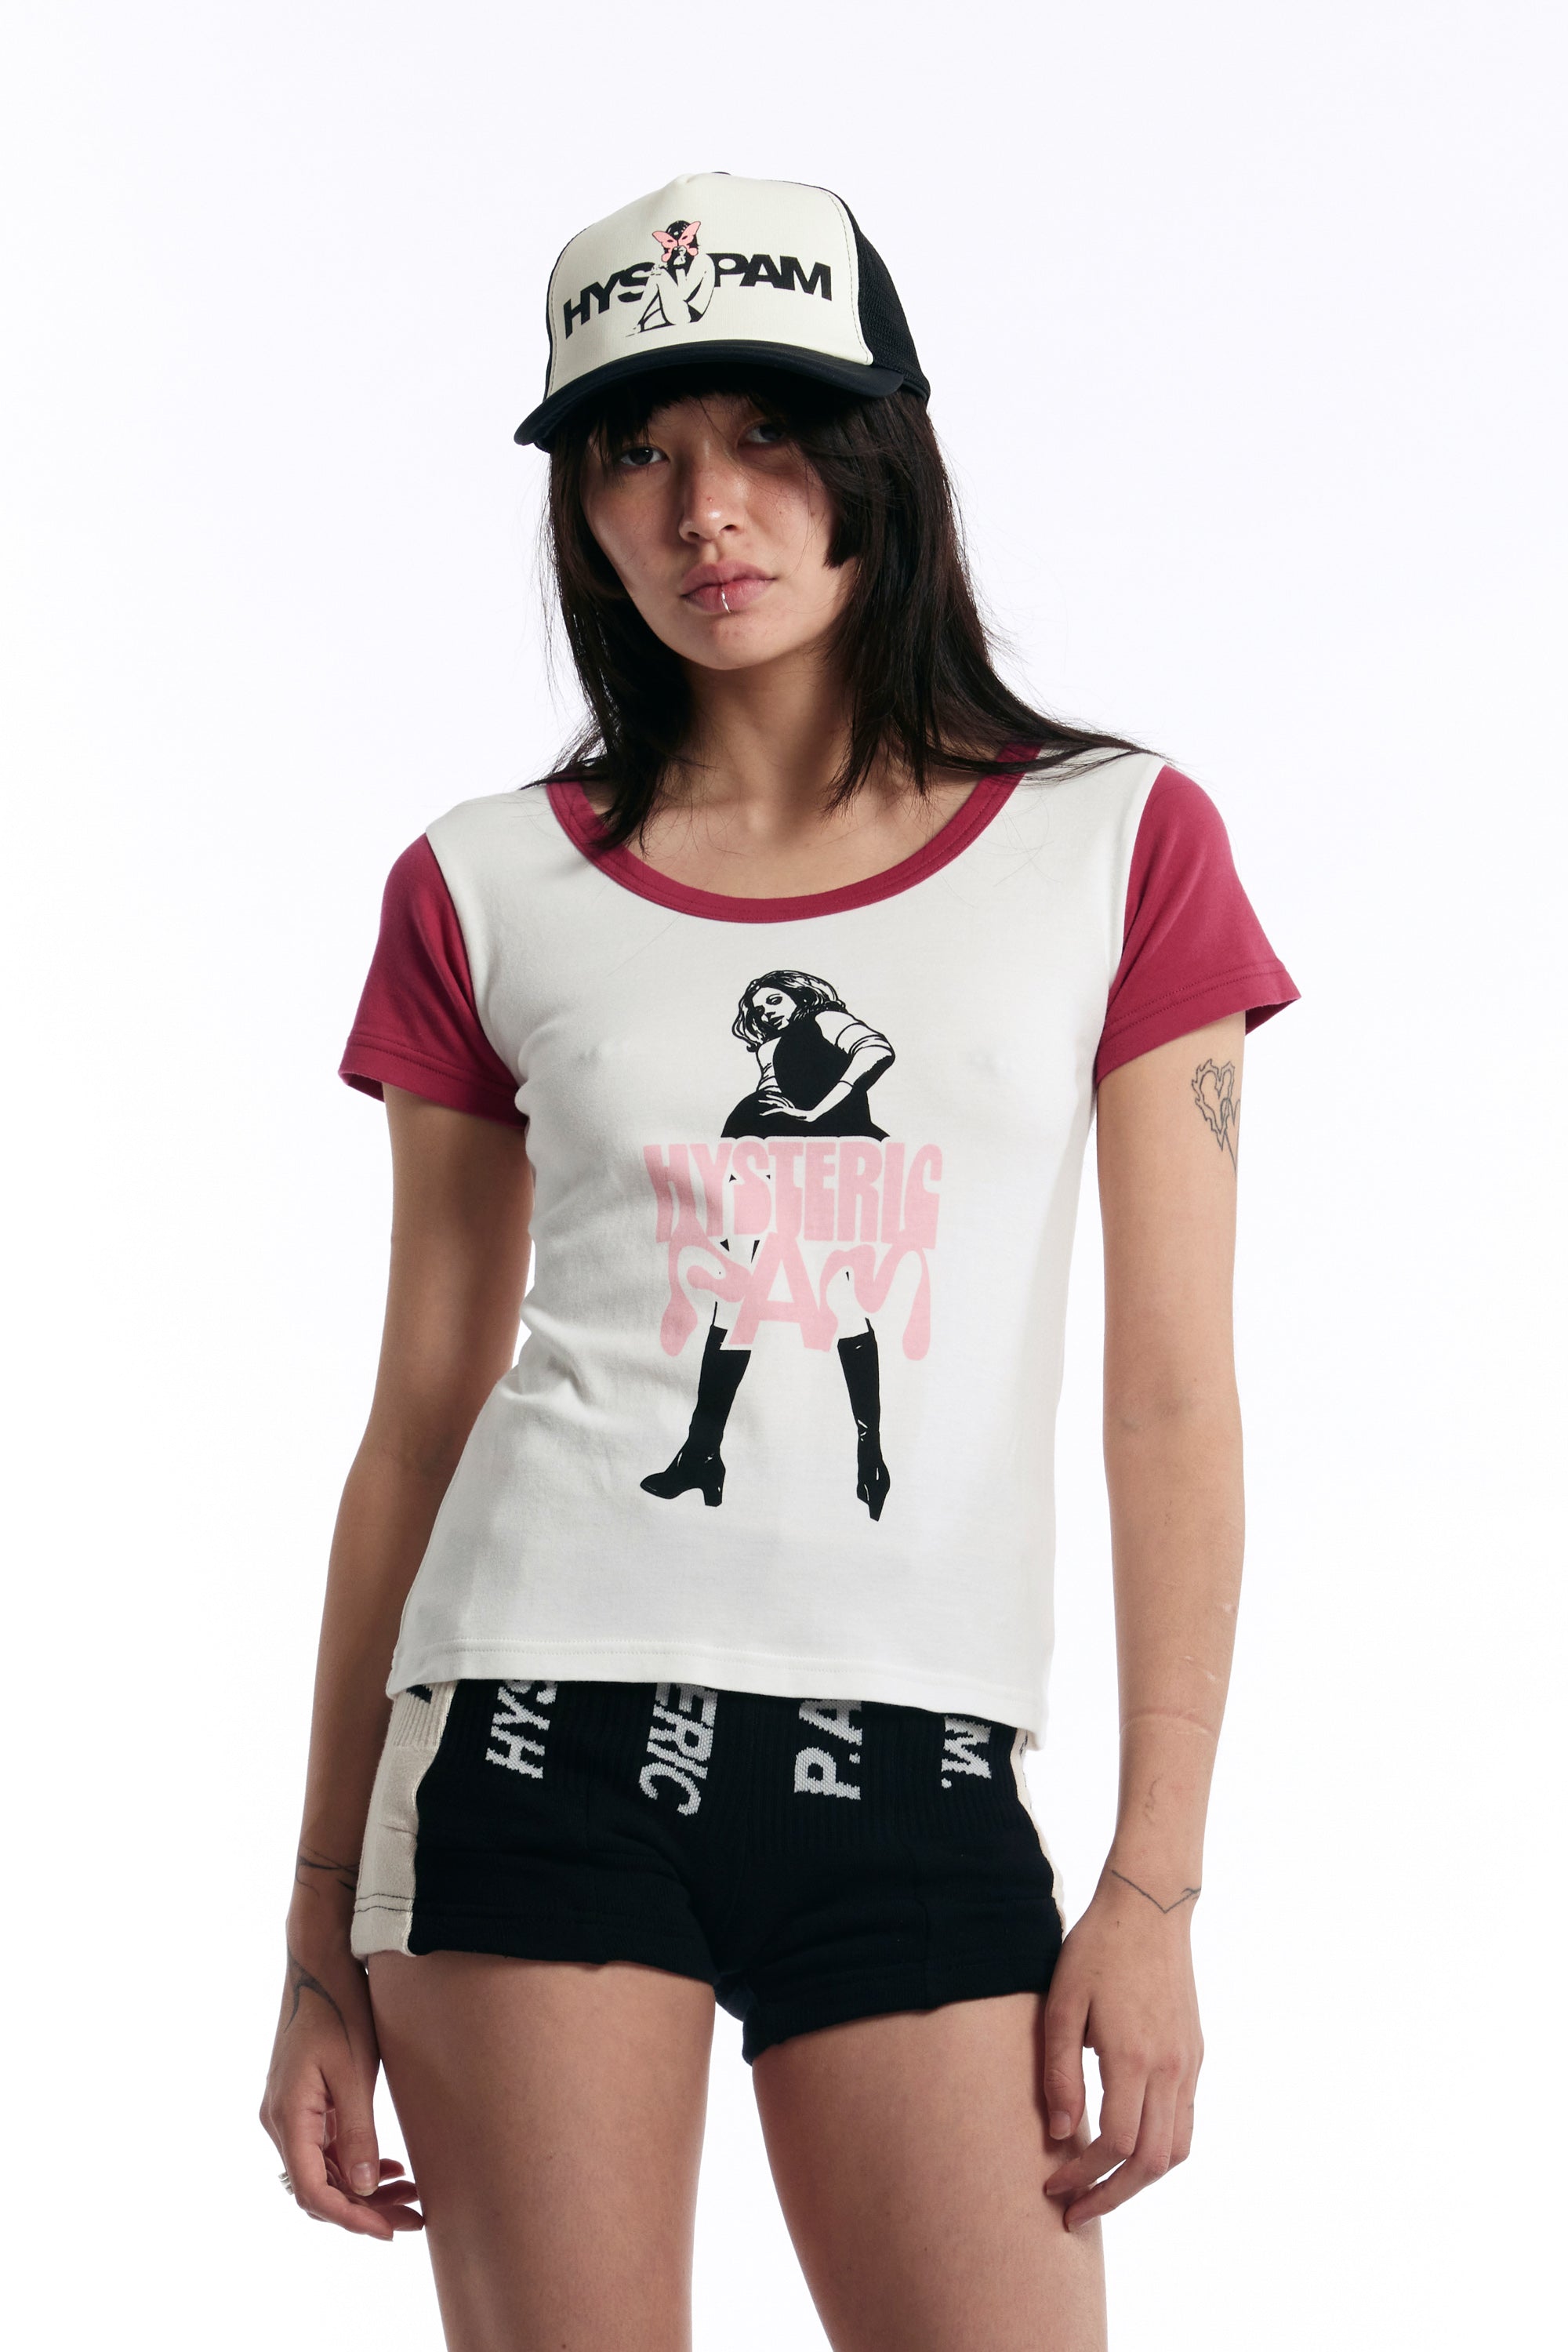 The PAM X HYSTERIC GLAMOUR - VIXEN GIRL T SHIRT WHITE/PINK available online with global shipping, and in PAM Stores Melbourne and Sydney.